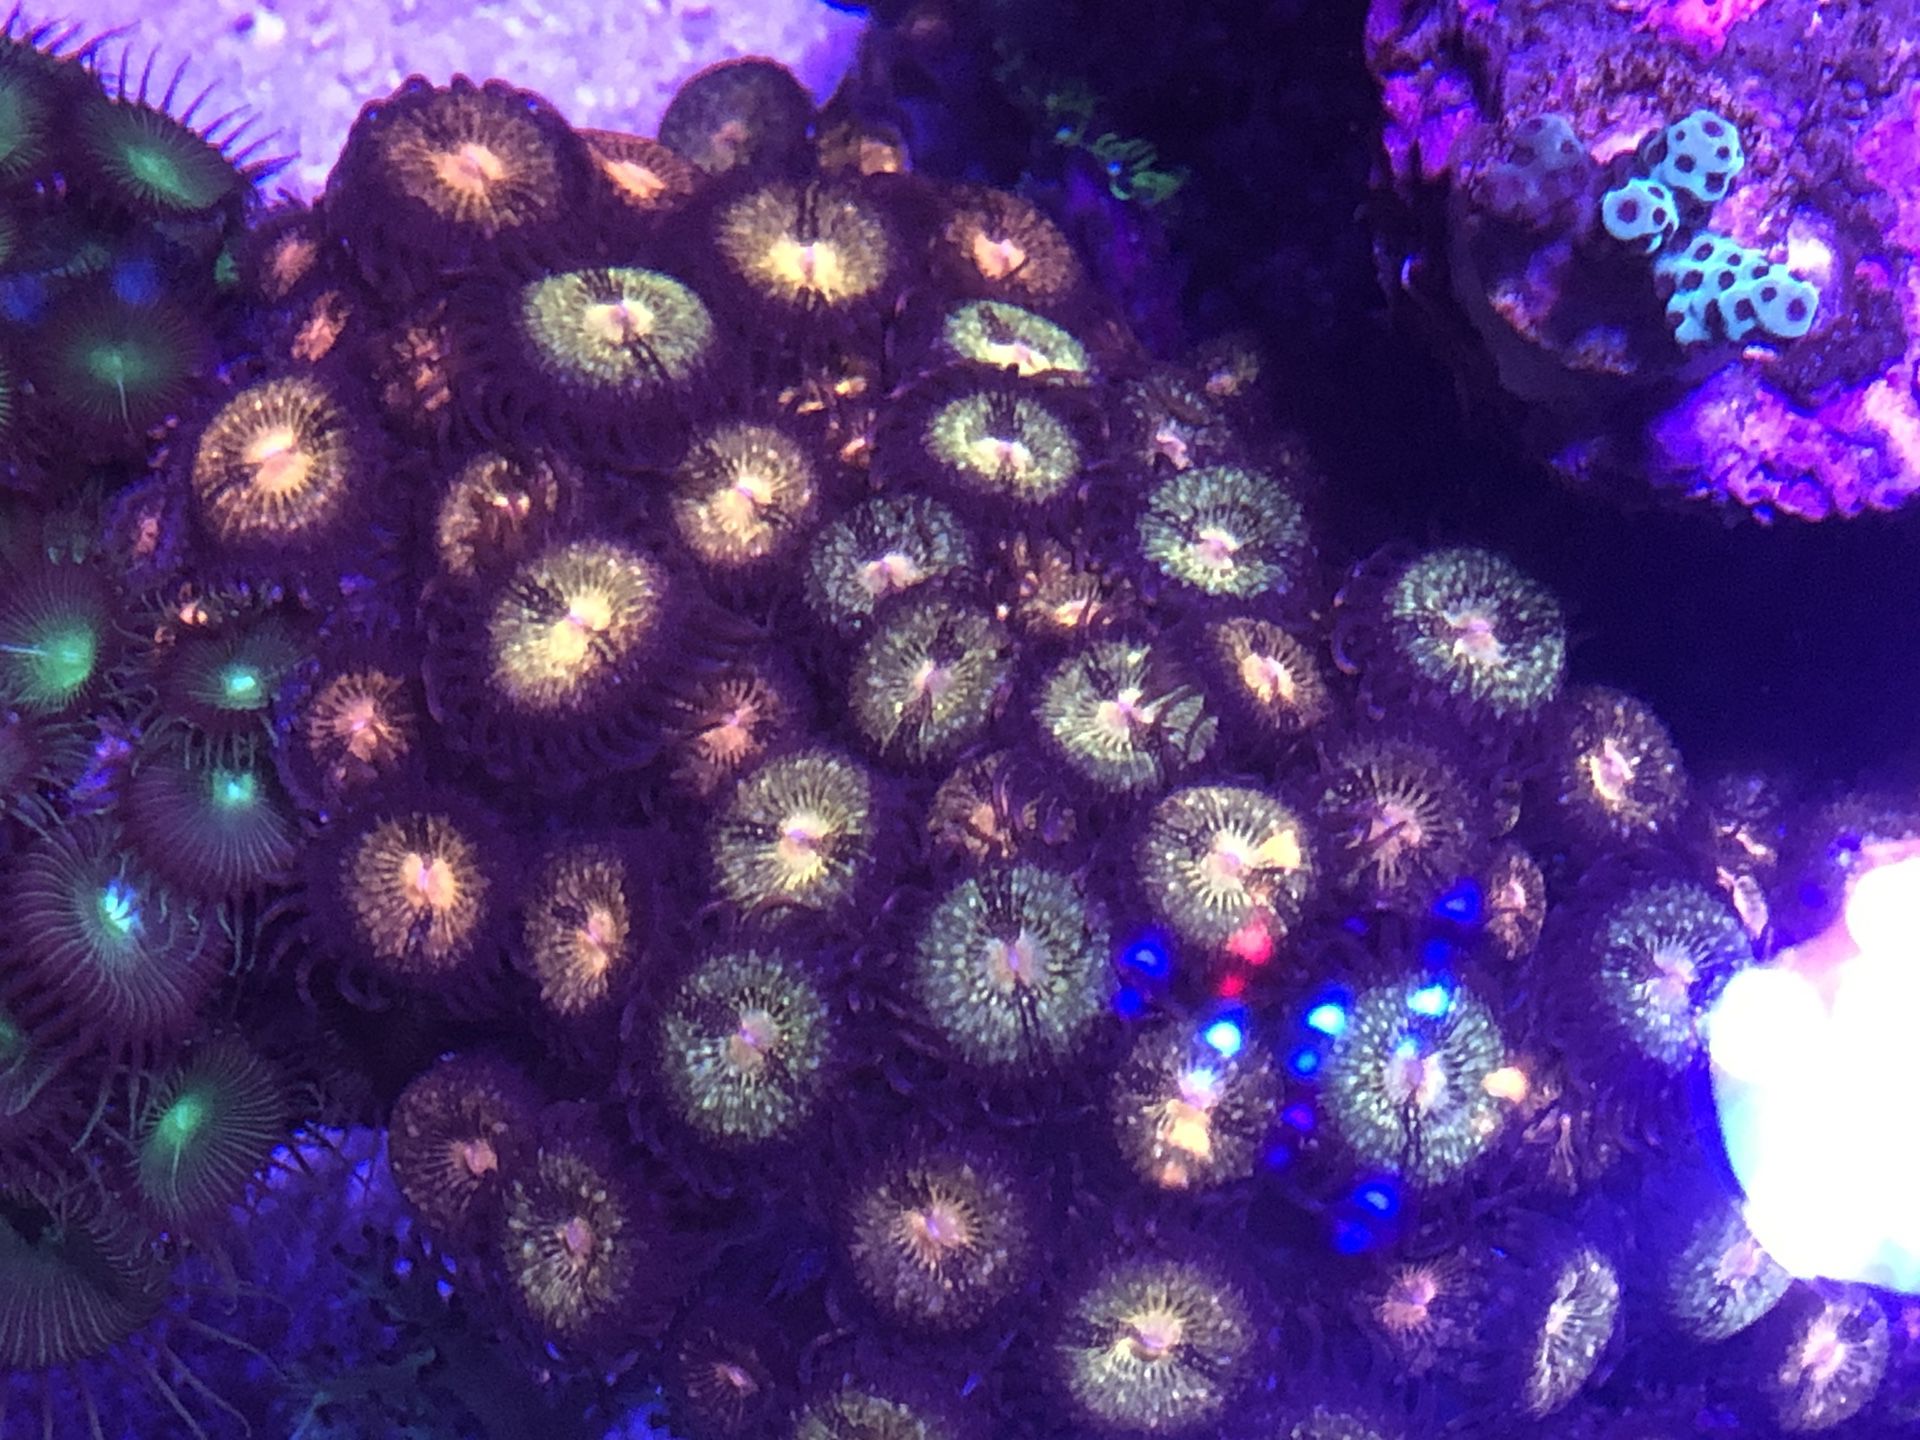 Pandora zoanthid coral colony